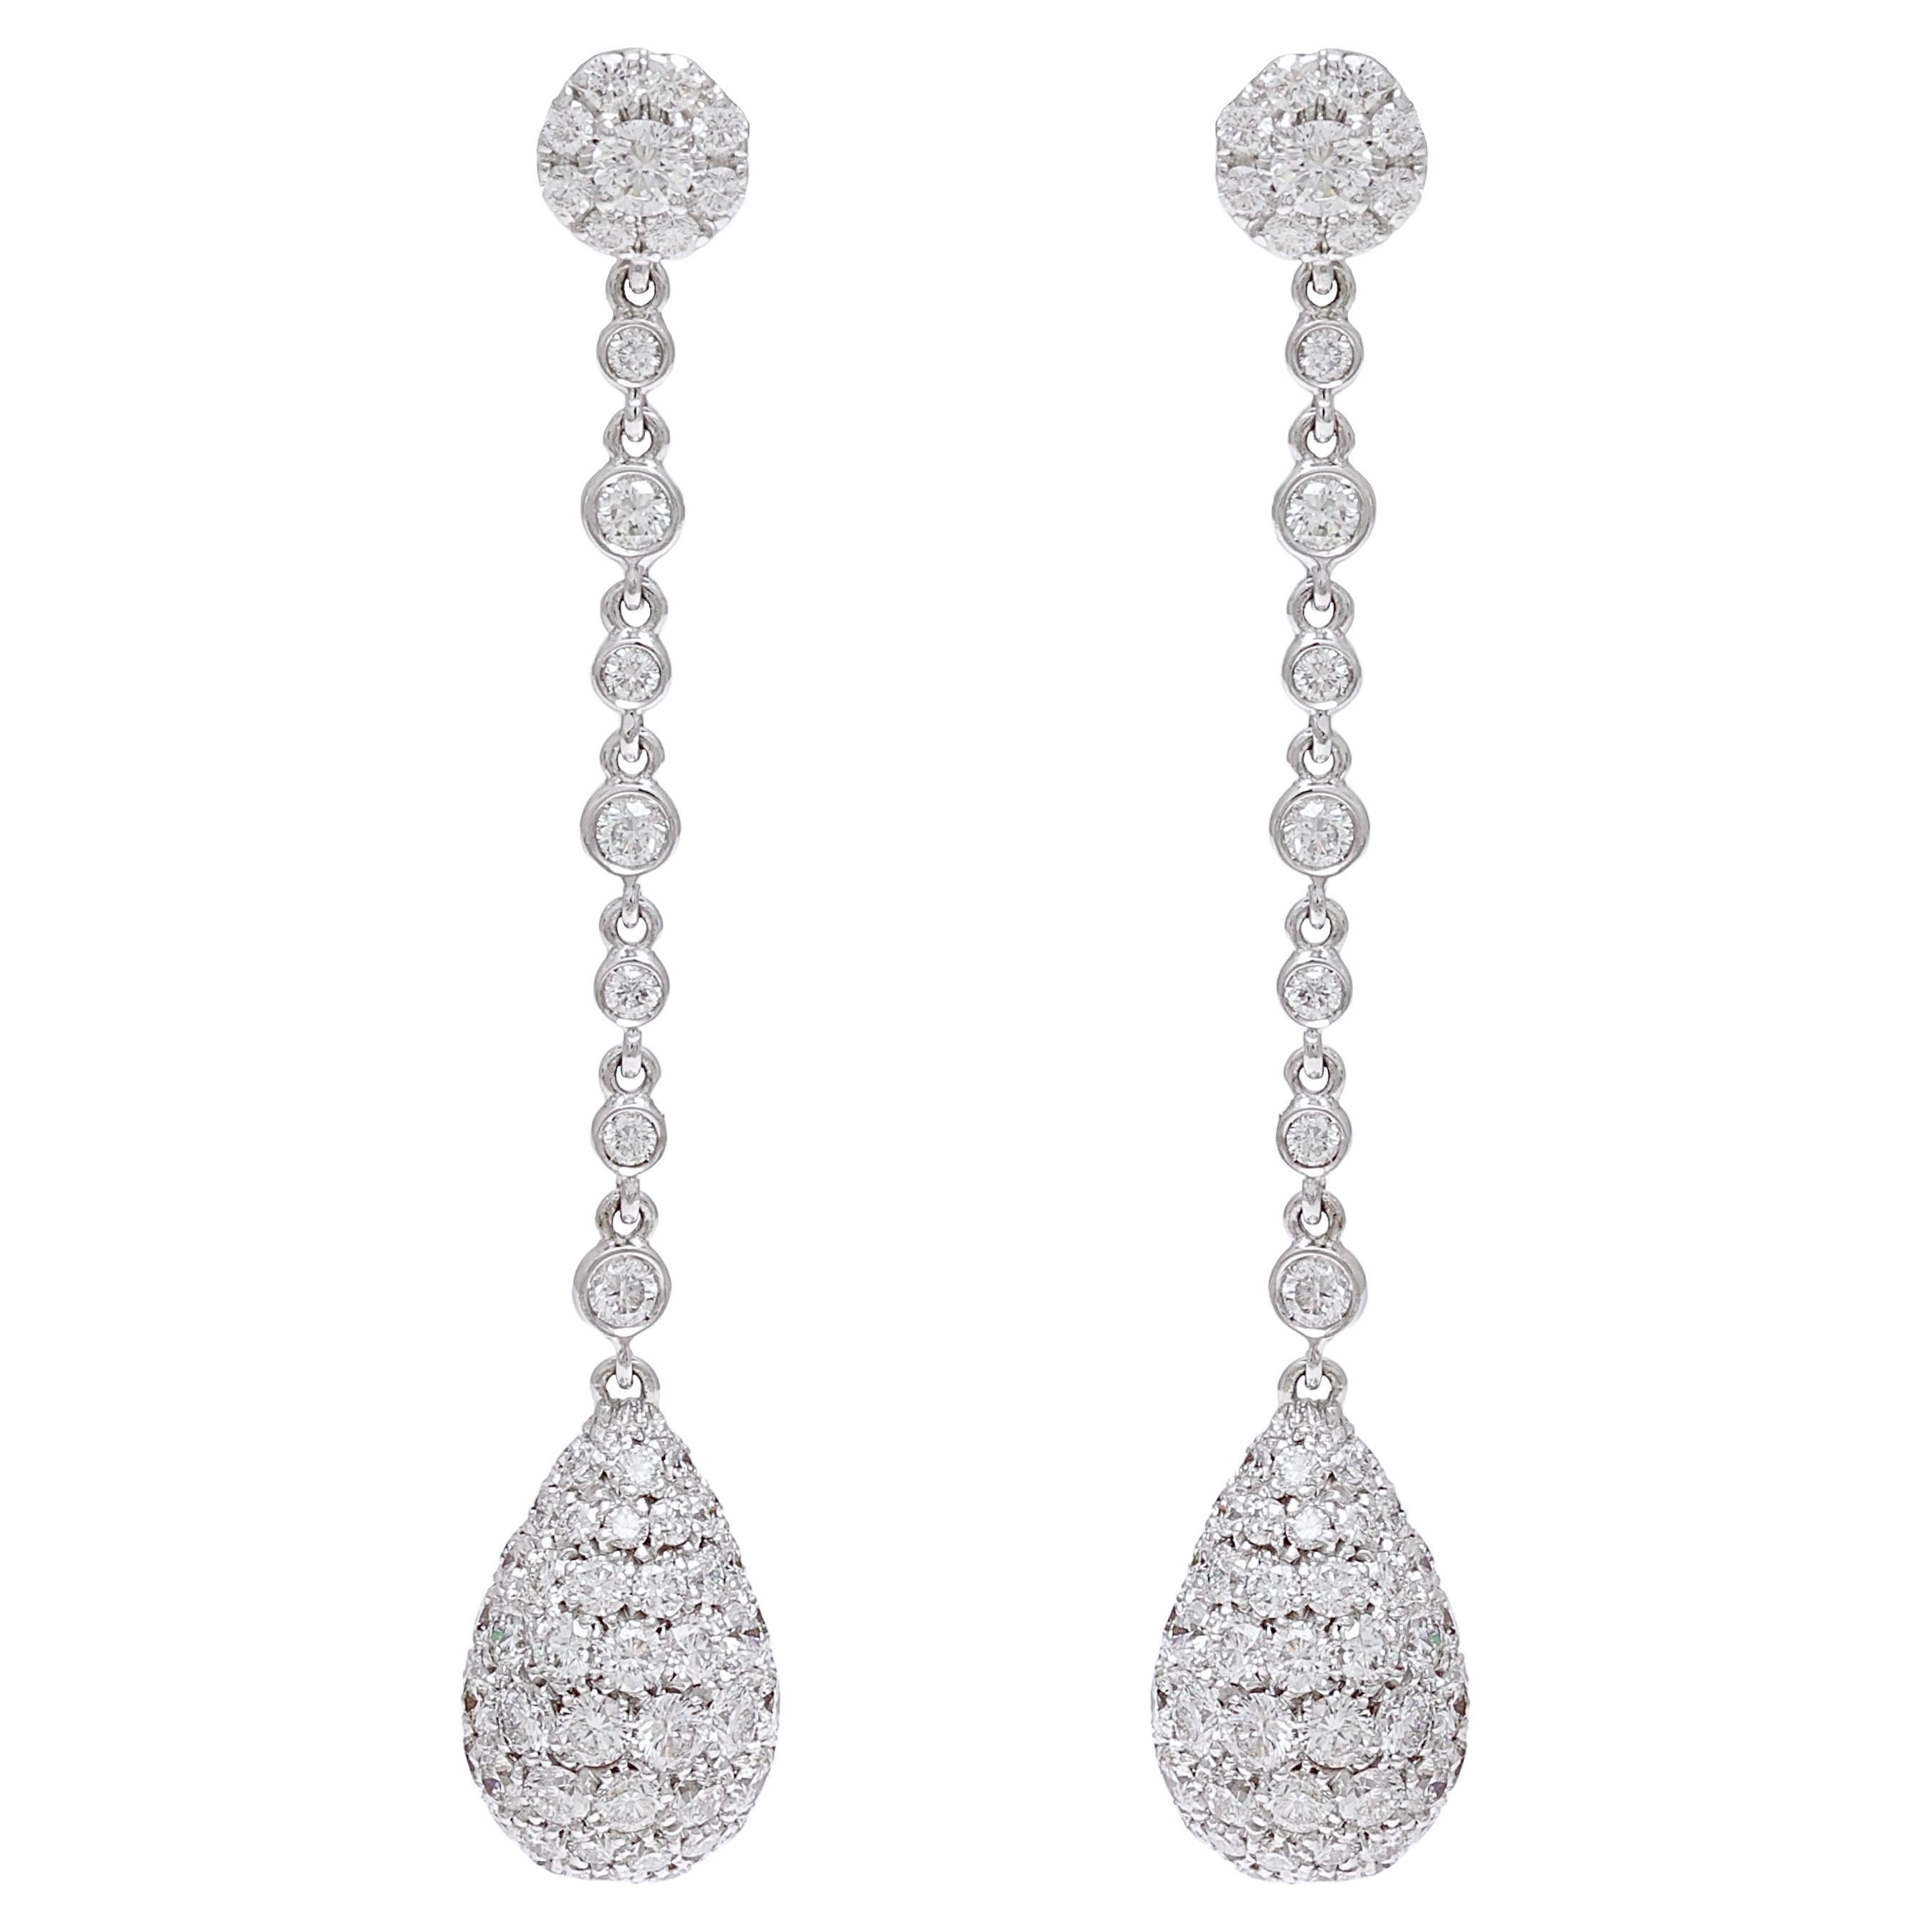 18kt White Gold Drop Earrings with 10.10 Ct Diamonds